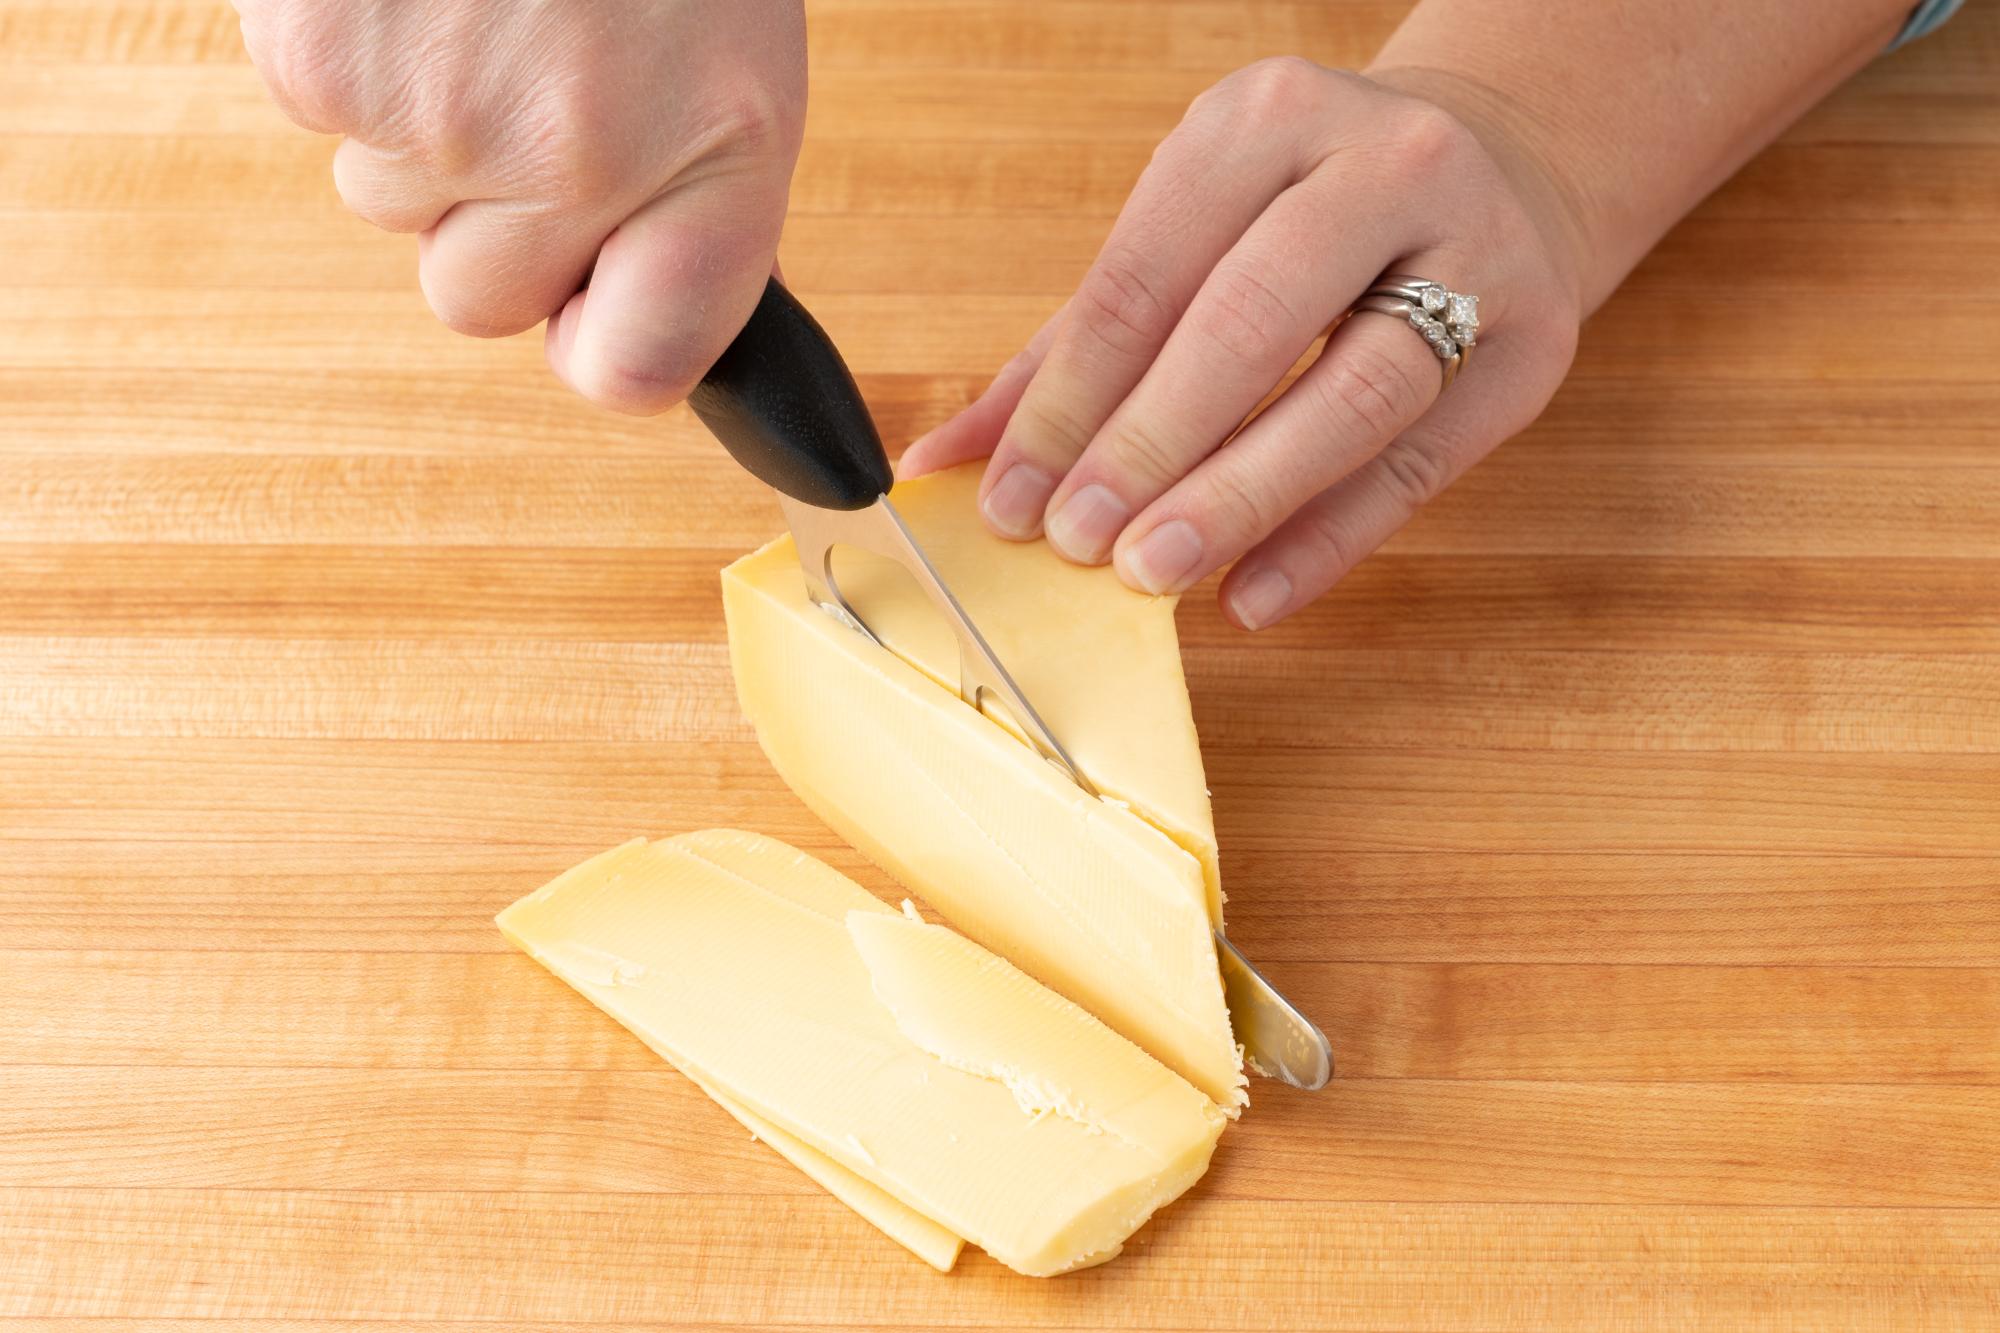 The Cheese Knife is a must for slicing 